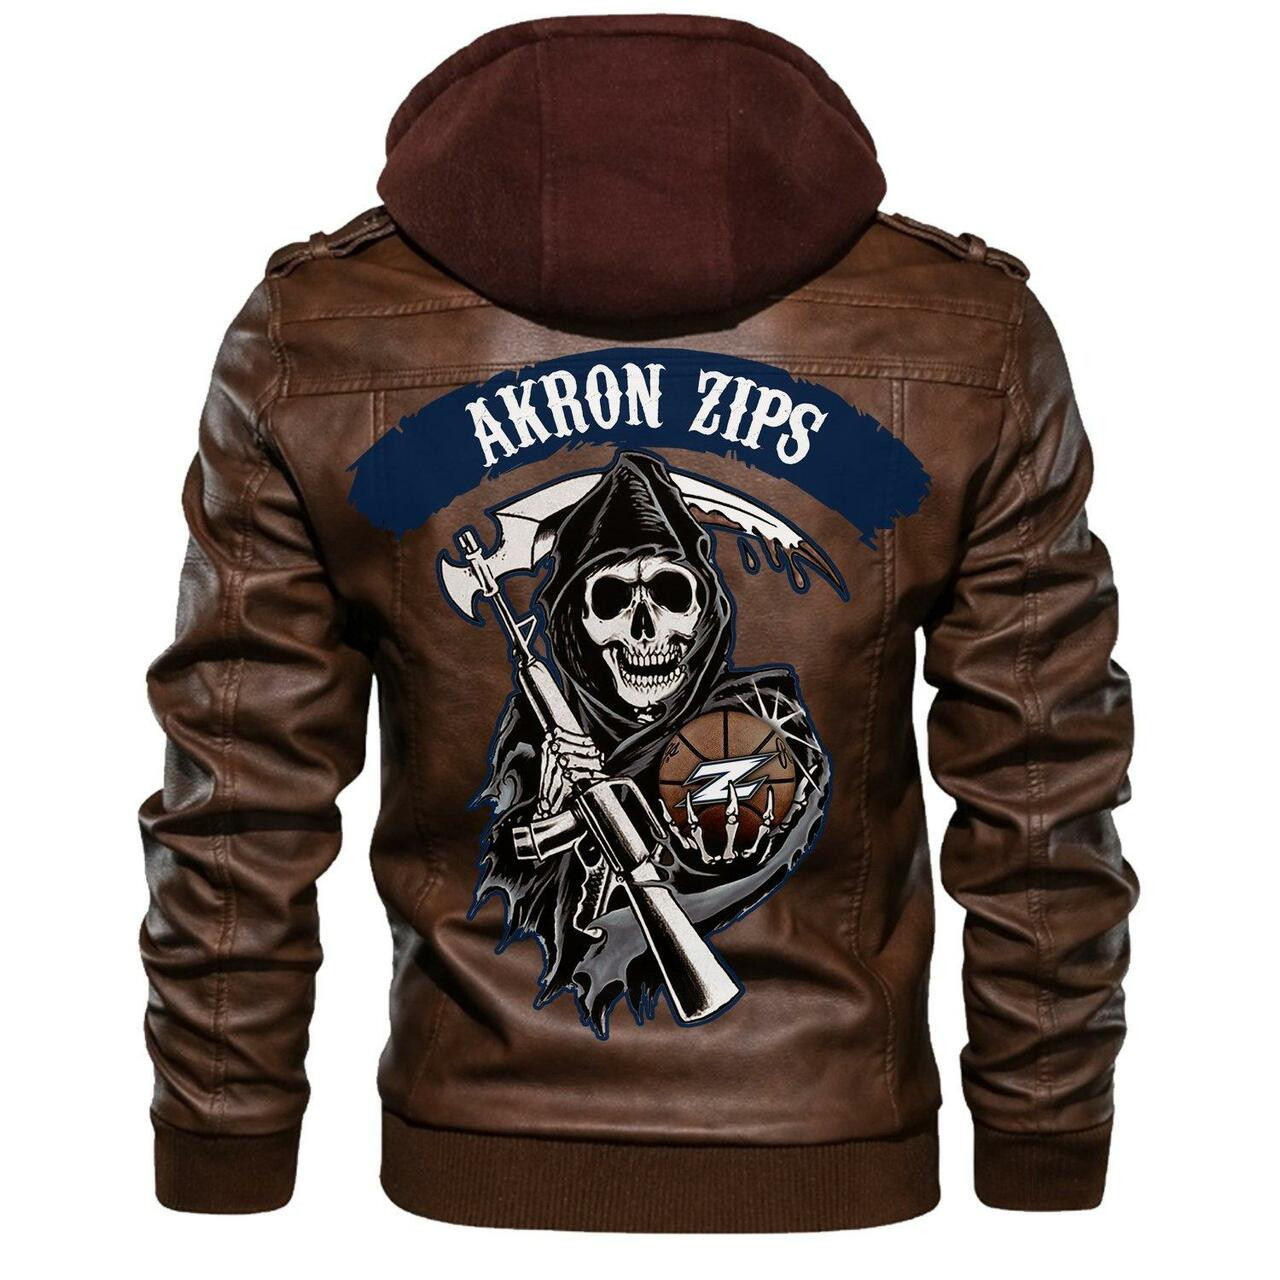 Check out and find the right leather jacket below 241